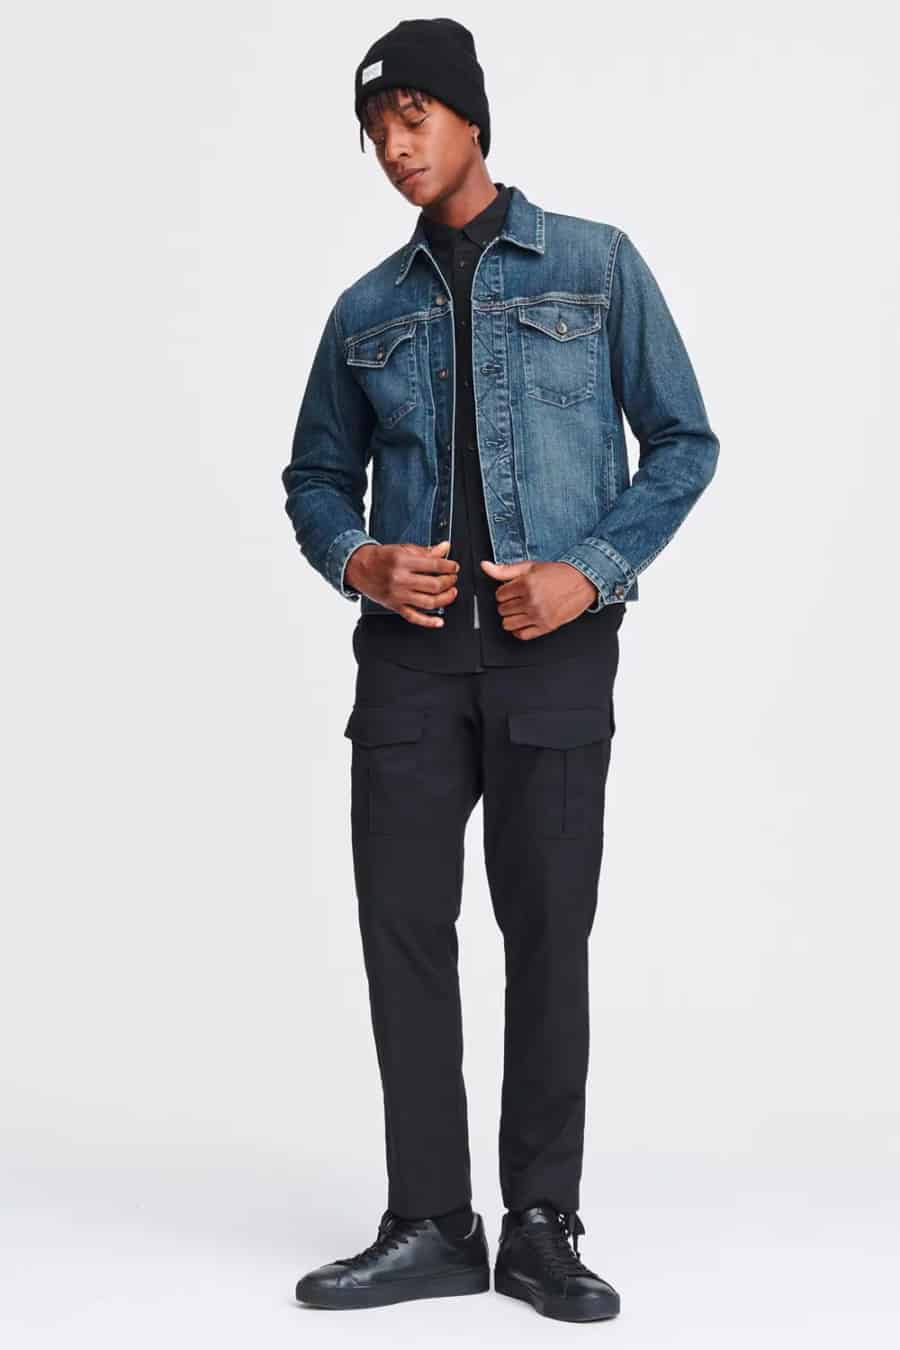 Men's washed jean jacket outfit with black shirt and chinos